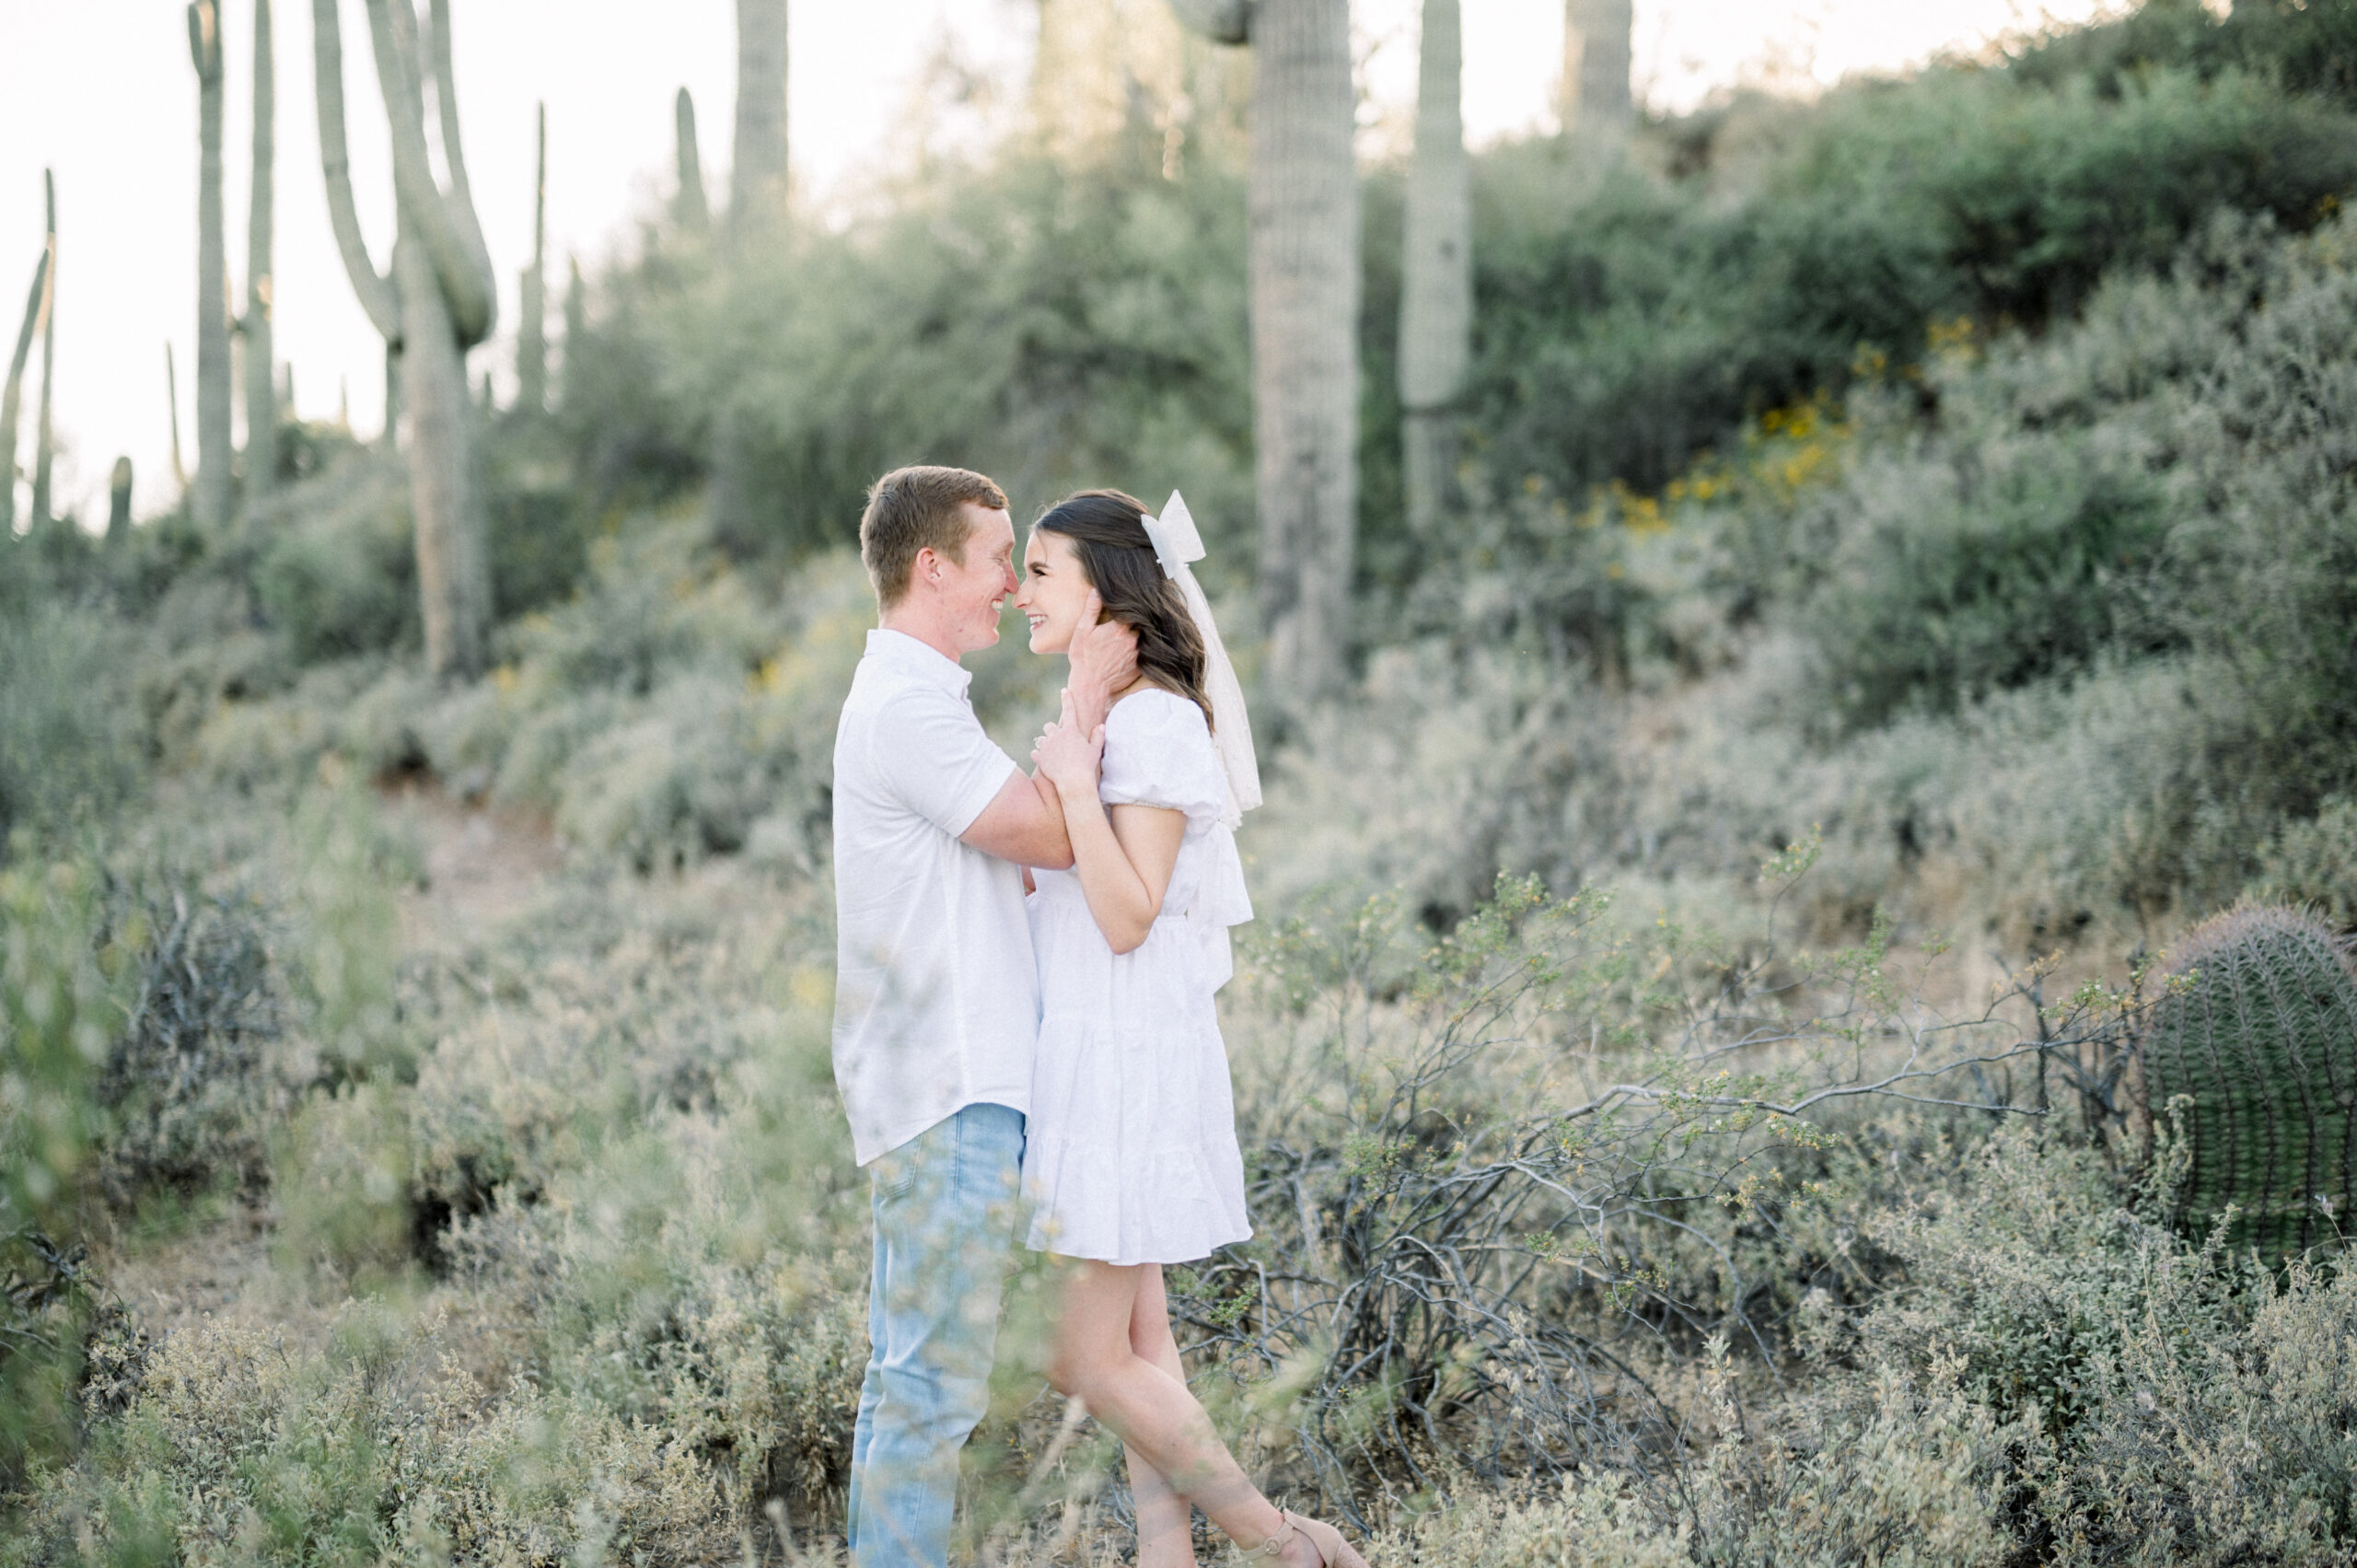 Brynna and Trent's Scottsdale Golden Desert Engagement Session was both sweet and stunning. These two are getting married this spring and I can't wait!